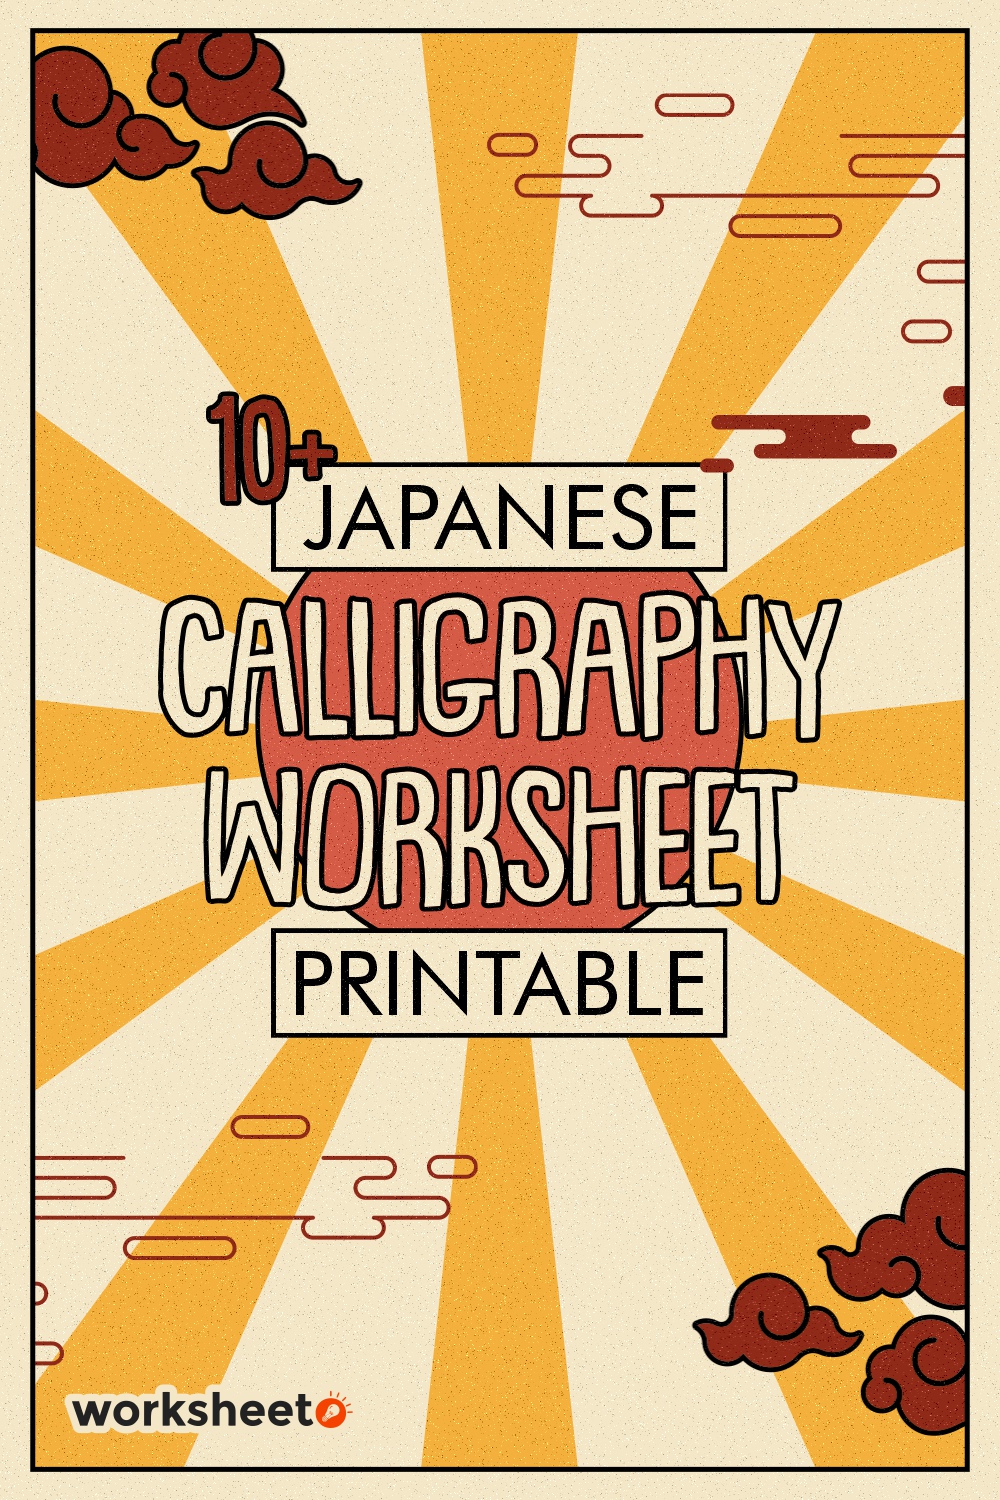 13 Images of Japanese Calligraphy Worksheets Printable